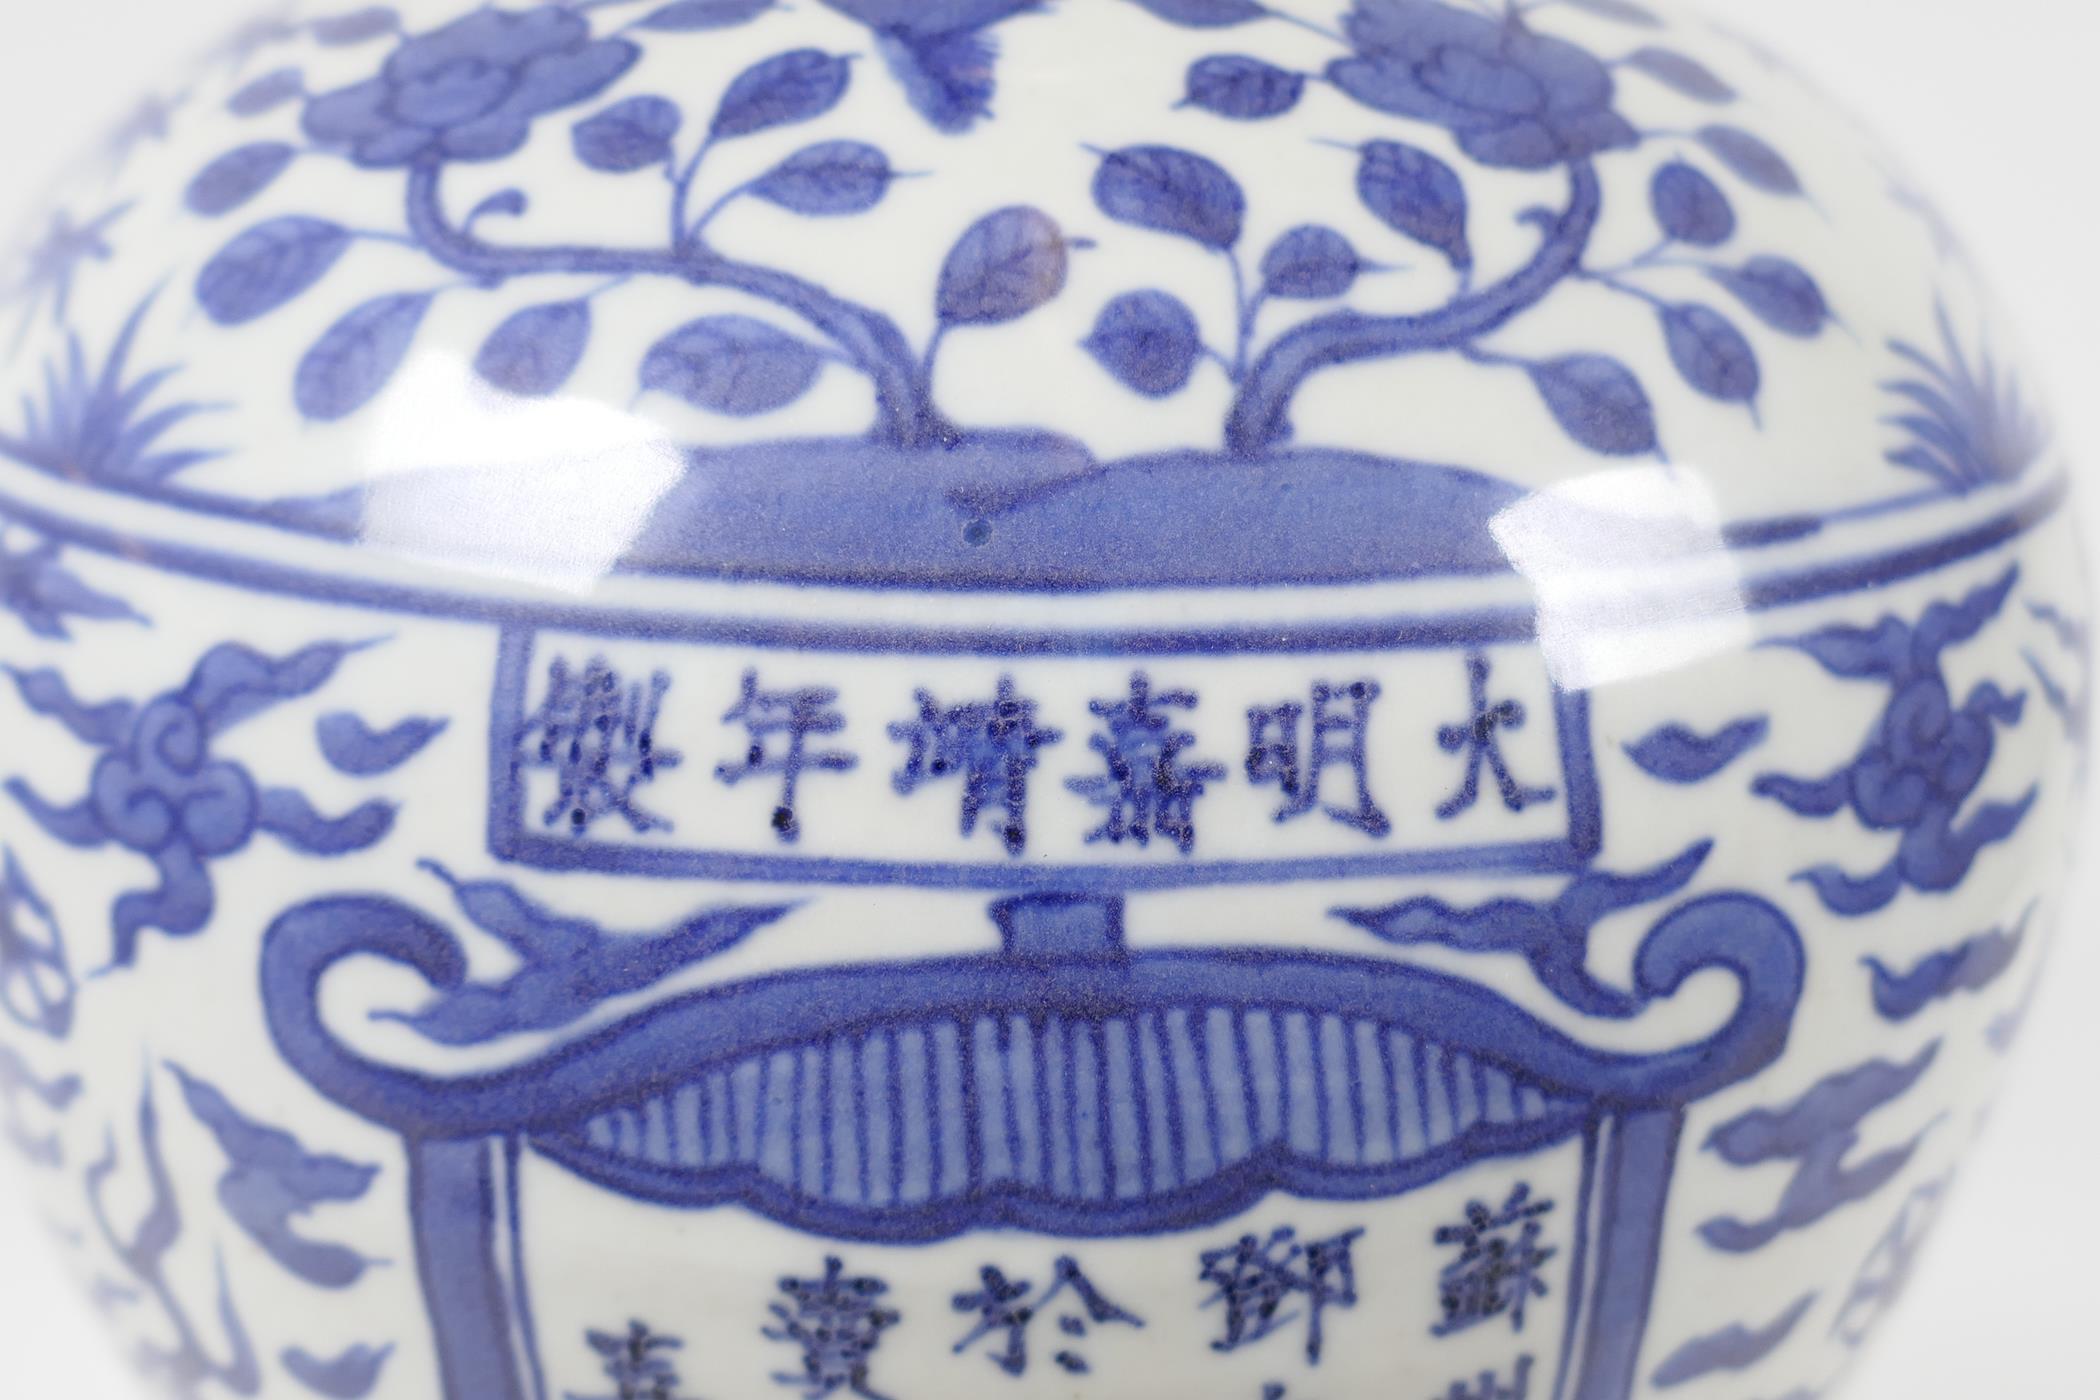 A Chinese blue and white porcelain meiping vase decorated with dragons and character inscriptions, - Image 4 of 6